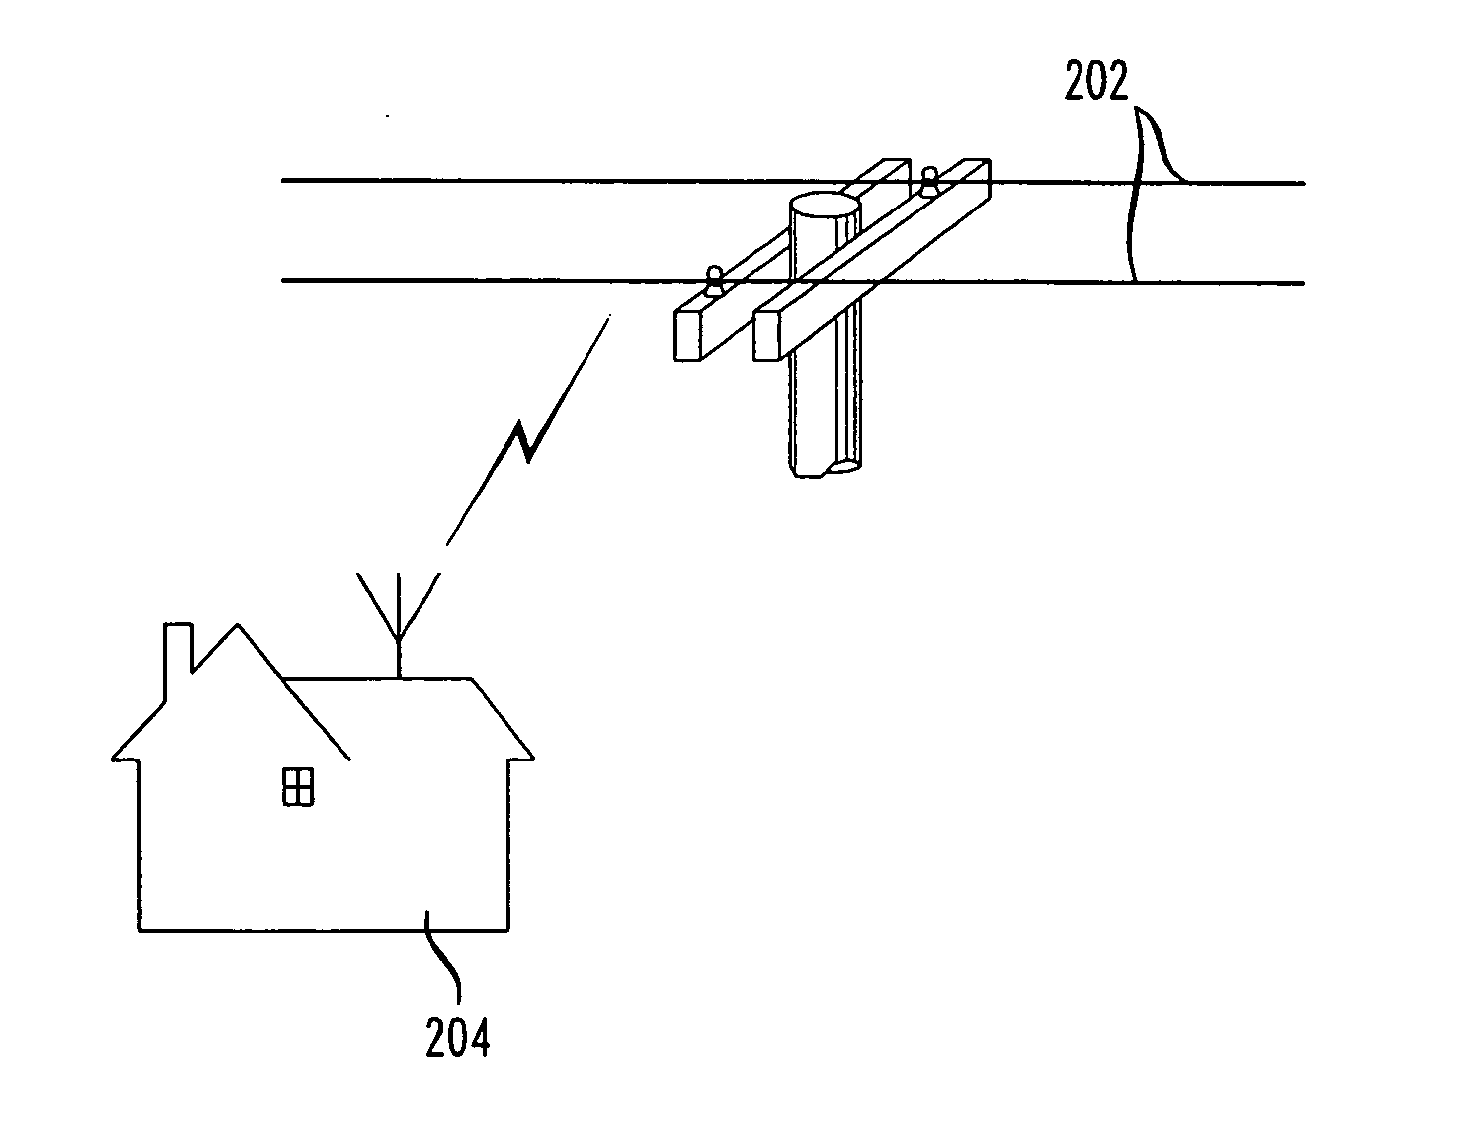 Interference Control in a Broadband Powerline Communication System